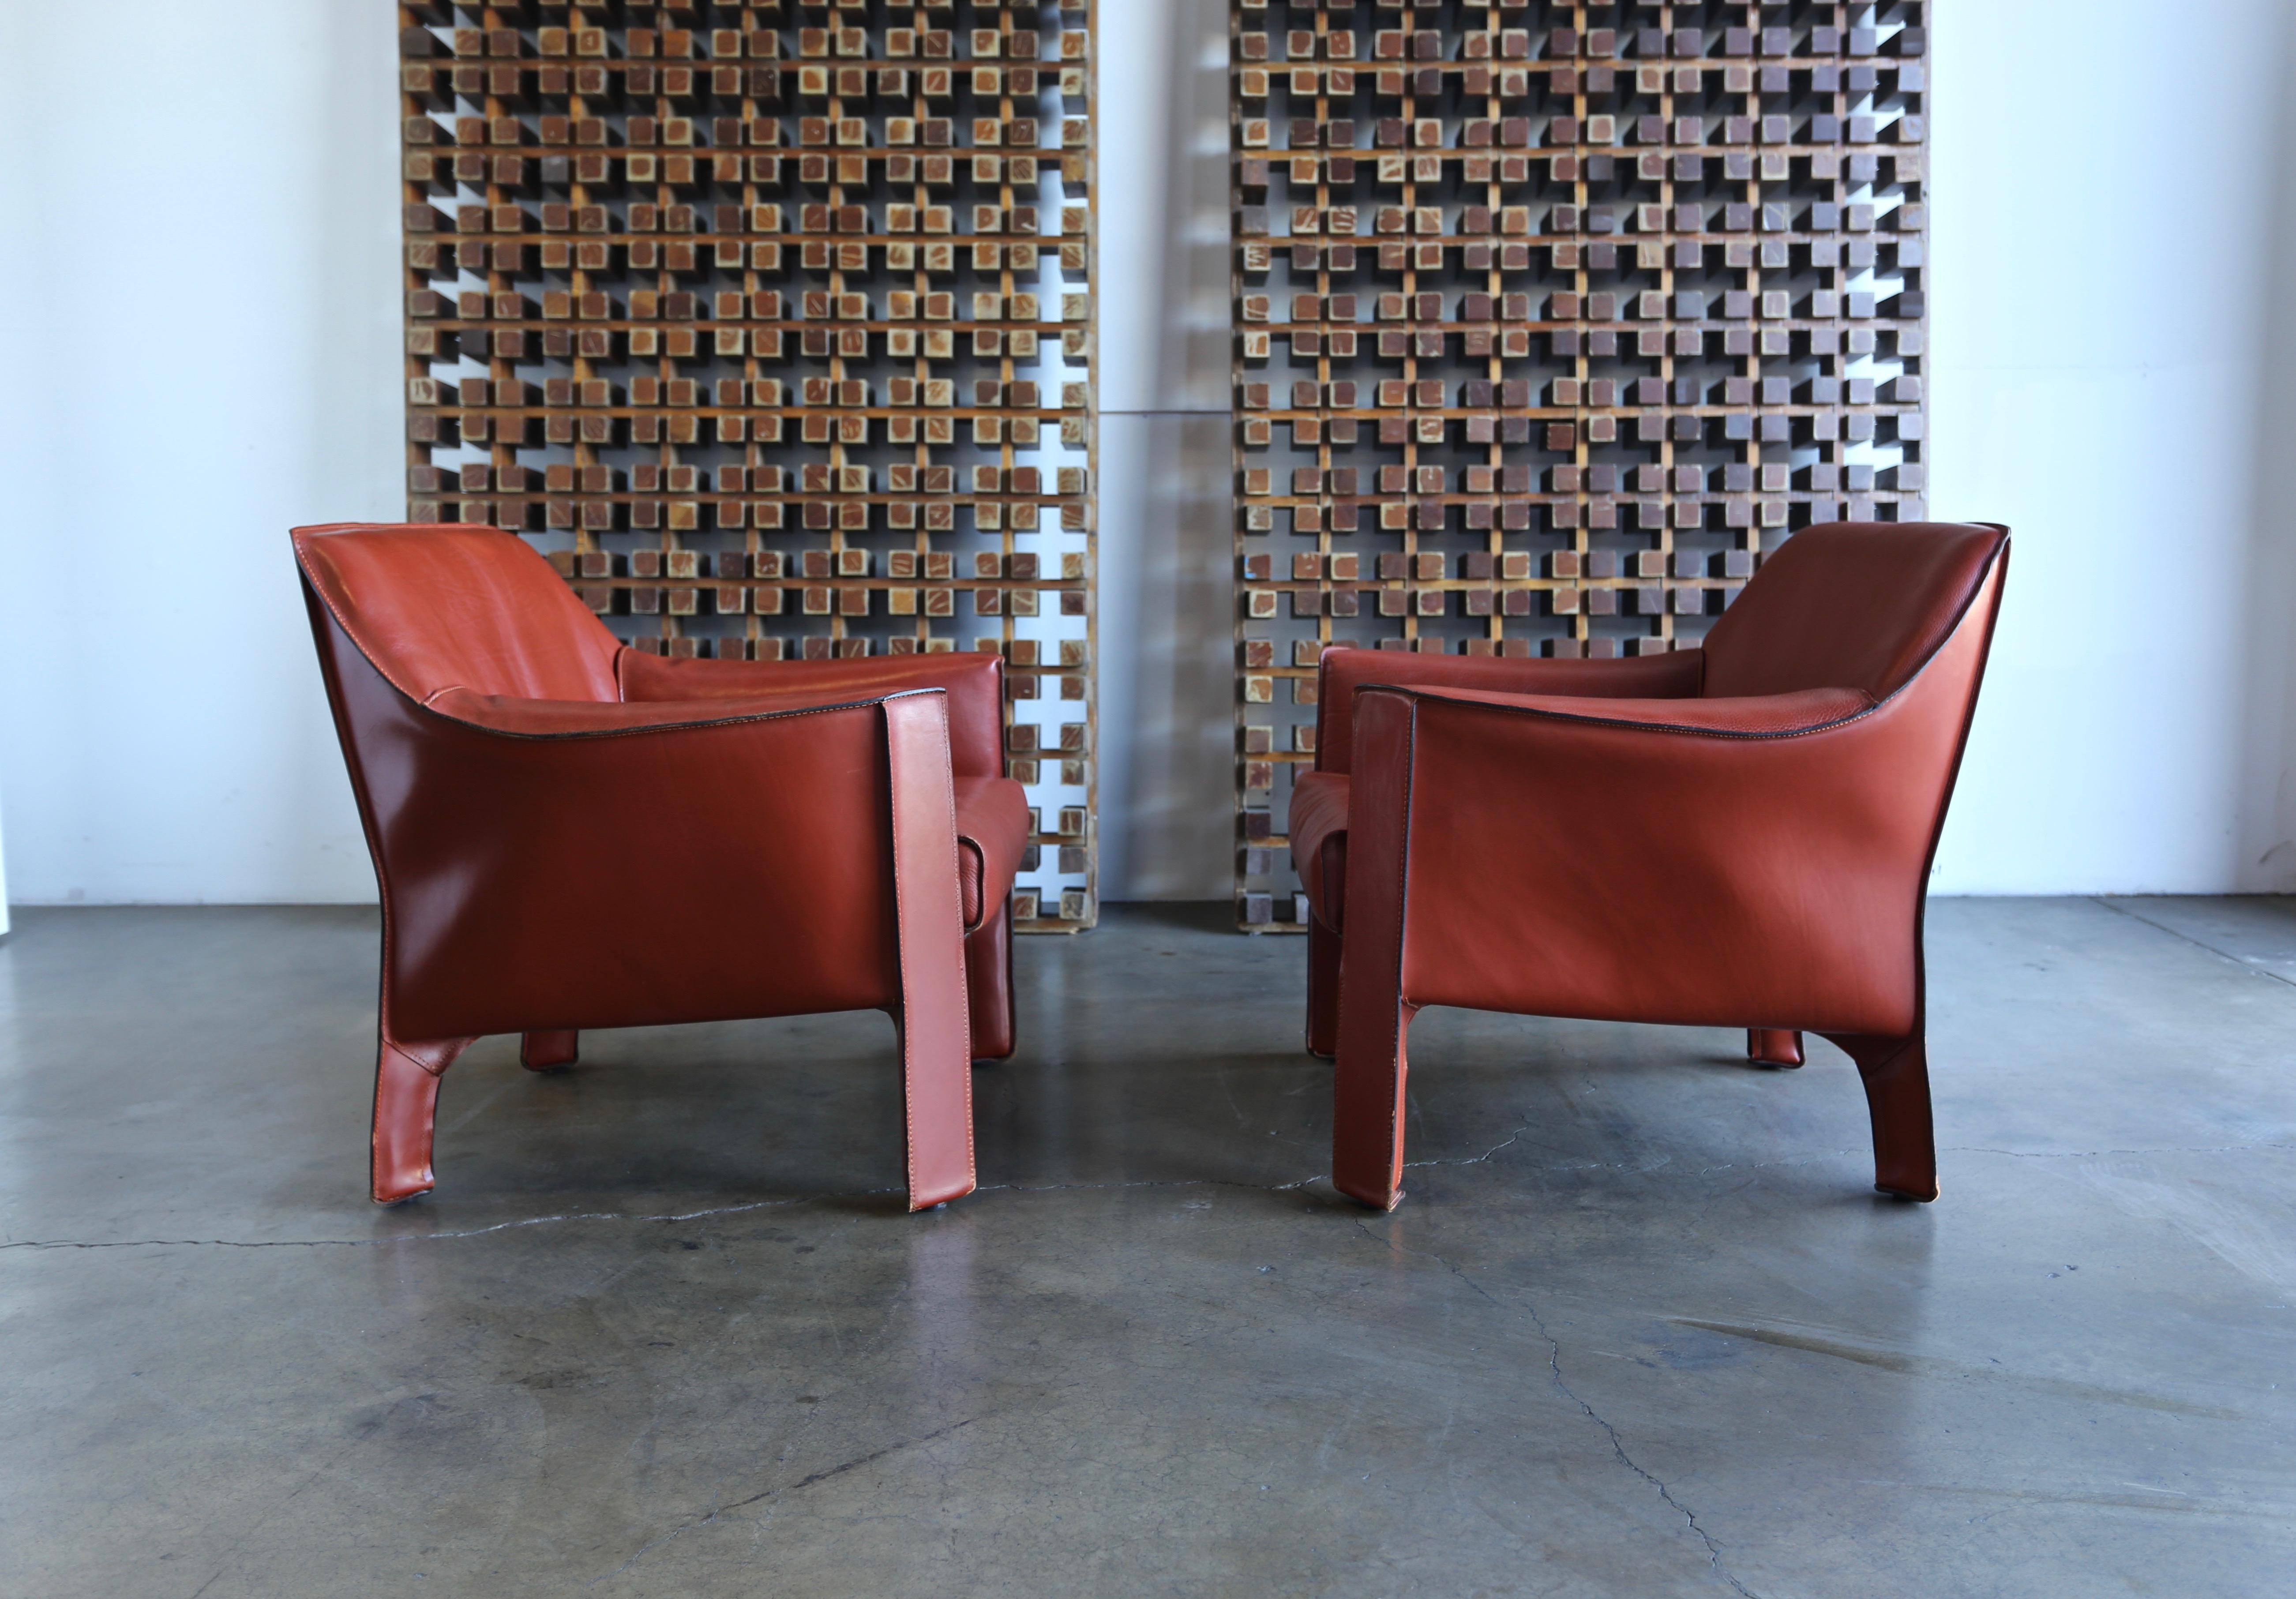 Pair of large CAB lounge chairs designed by Mario Bellini for Cassina. This is the largest chair designed for the CAB series.